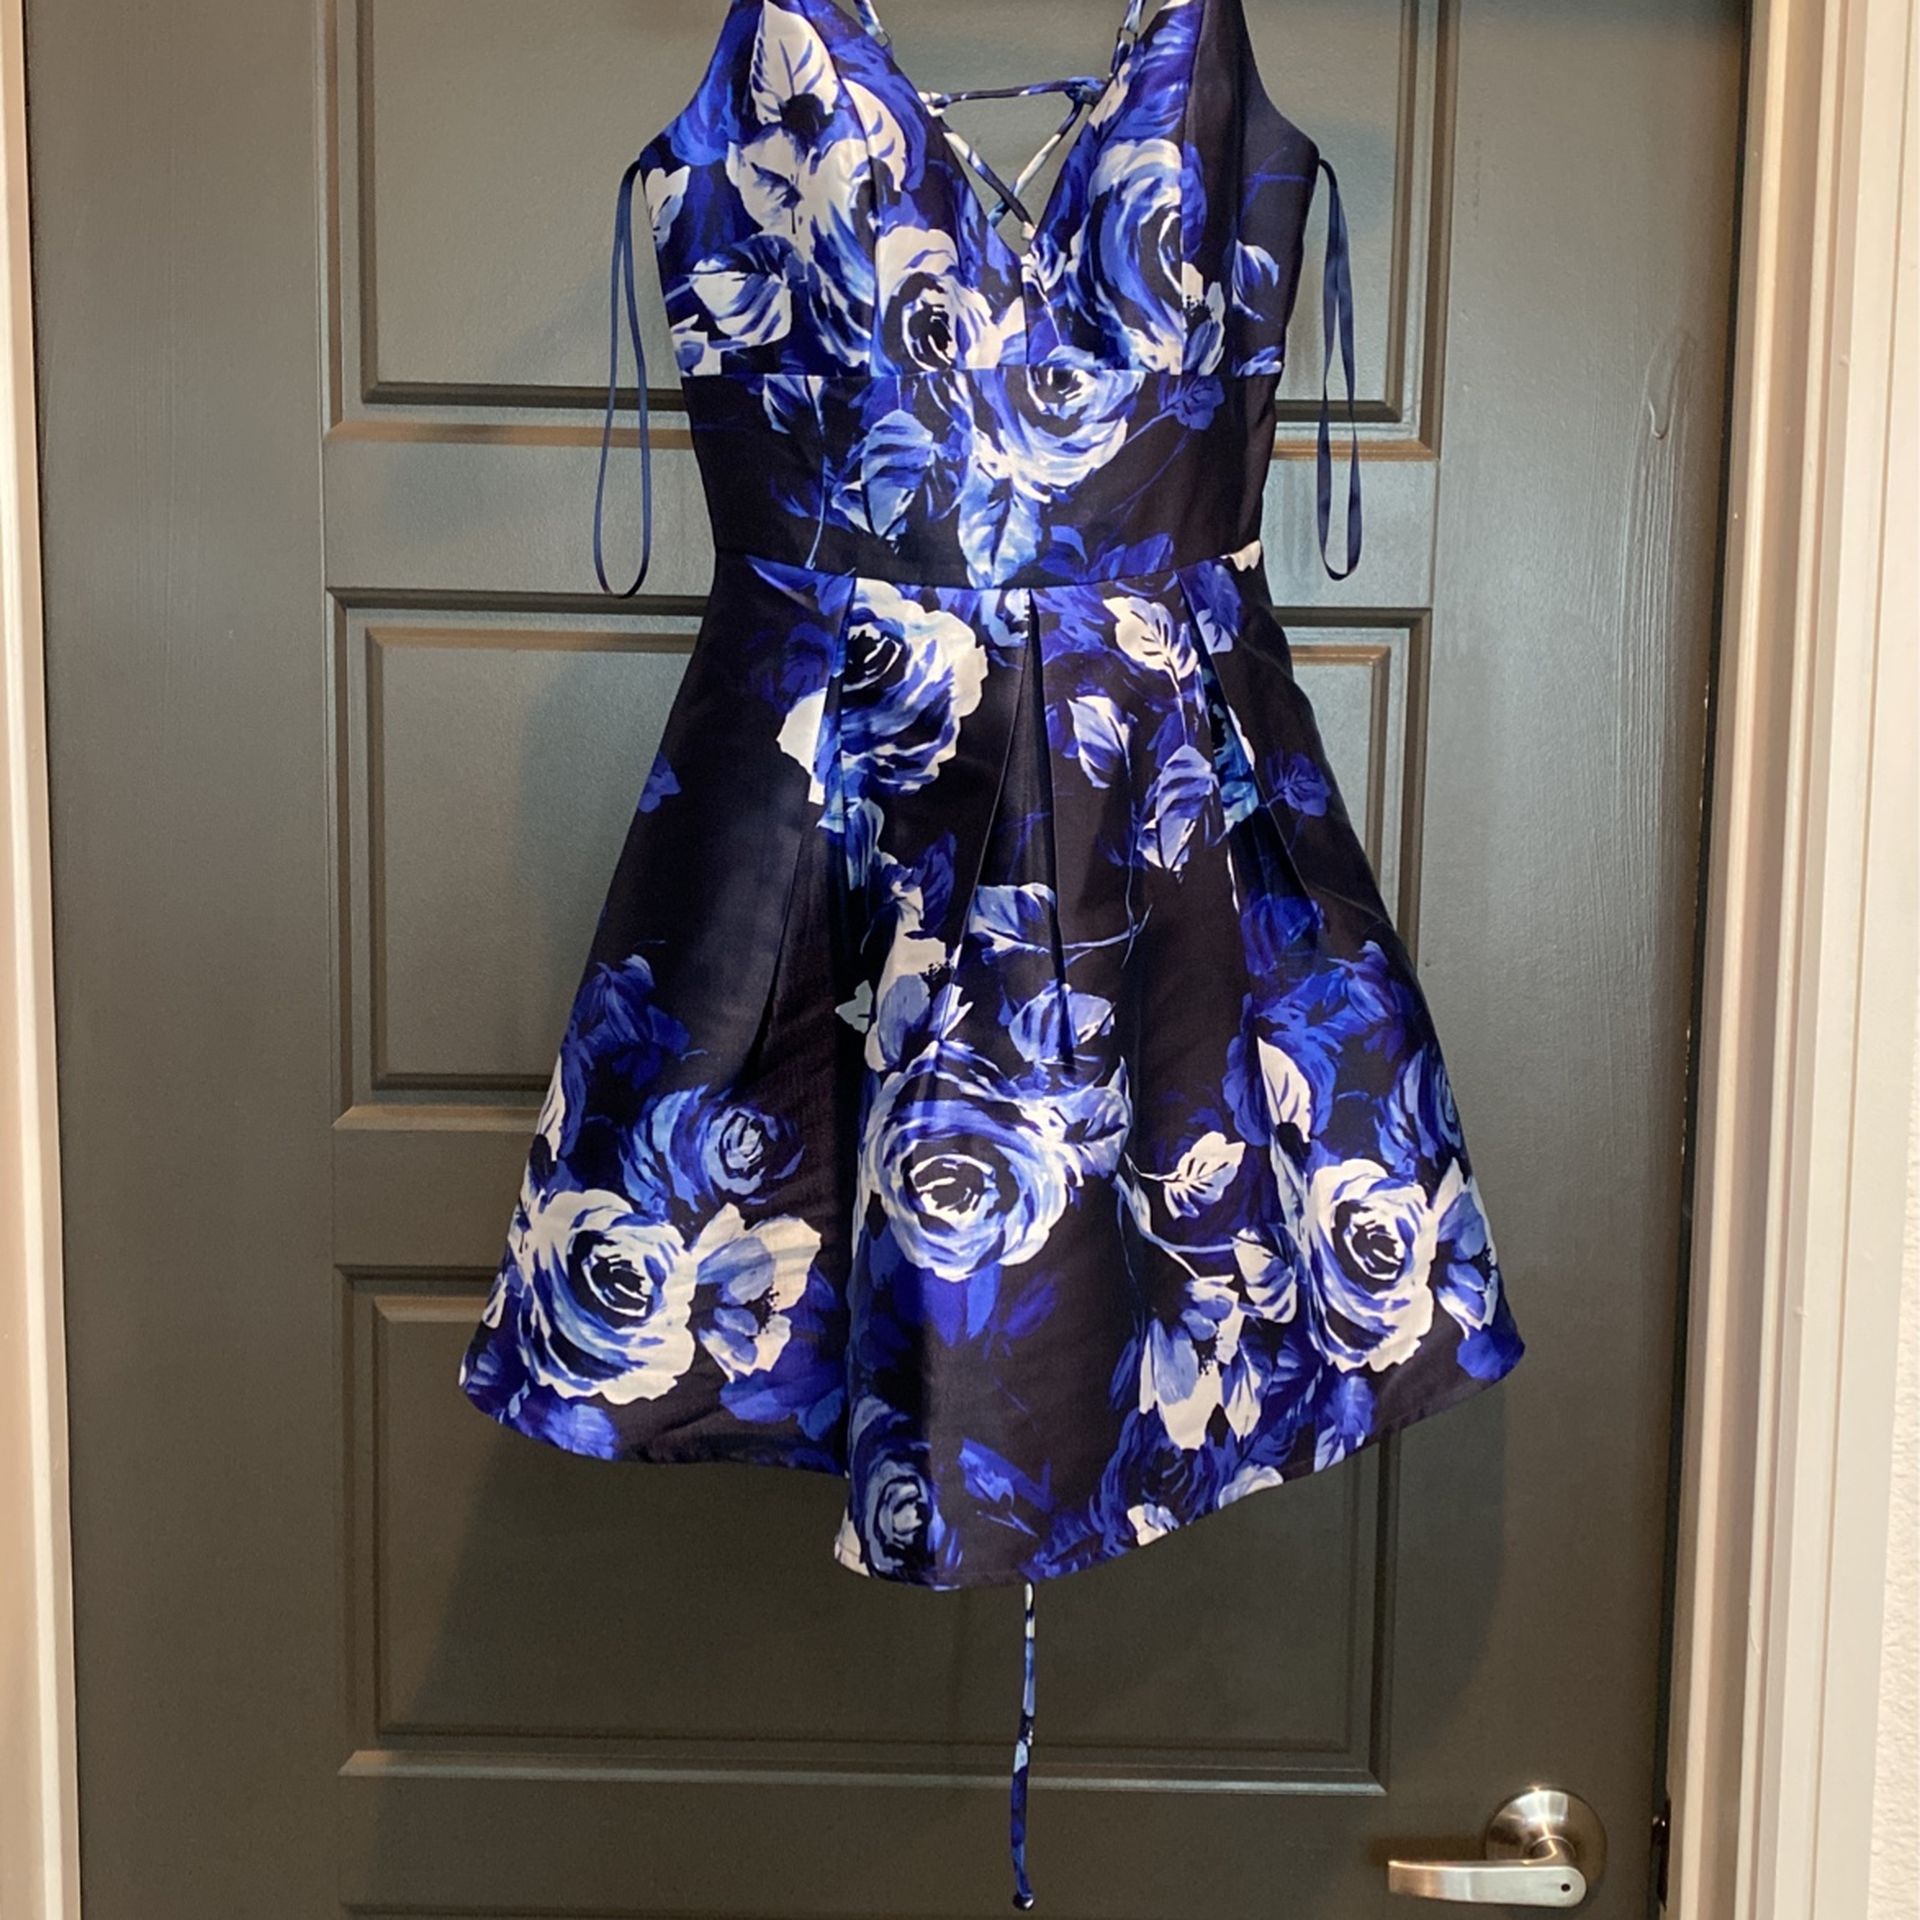 Windsor new dress size 3 never worn blue with white flowers